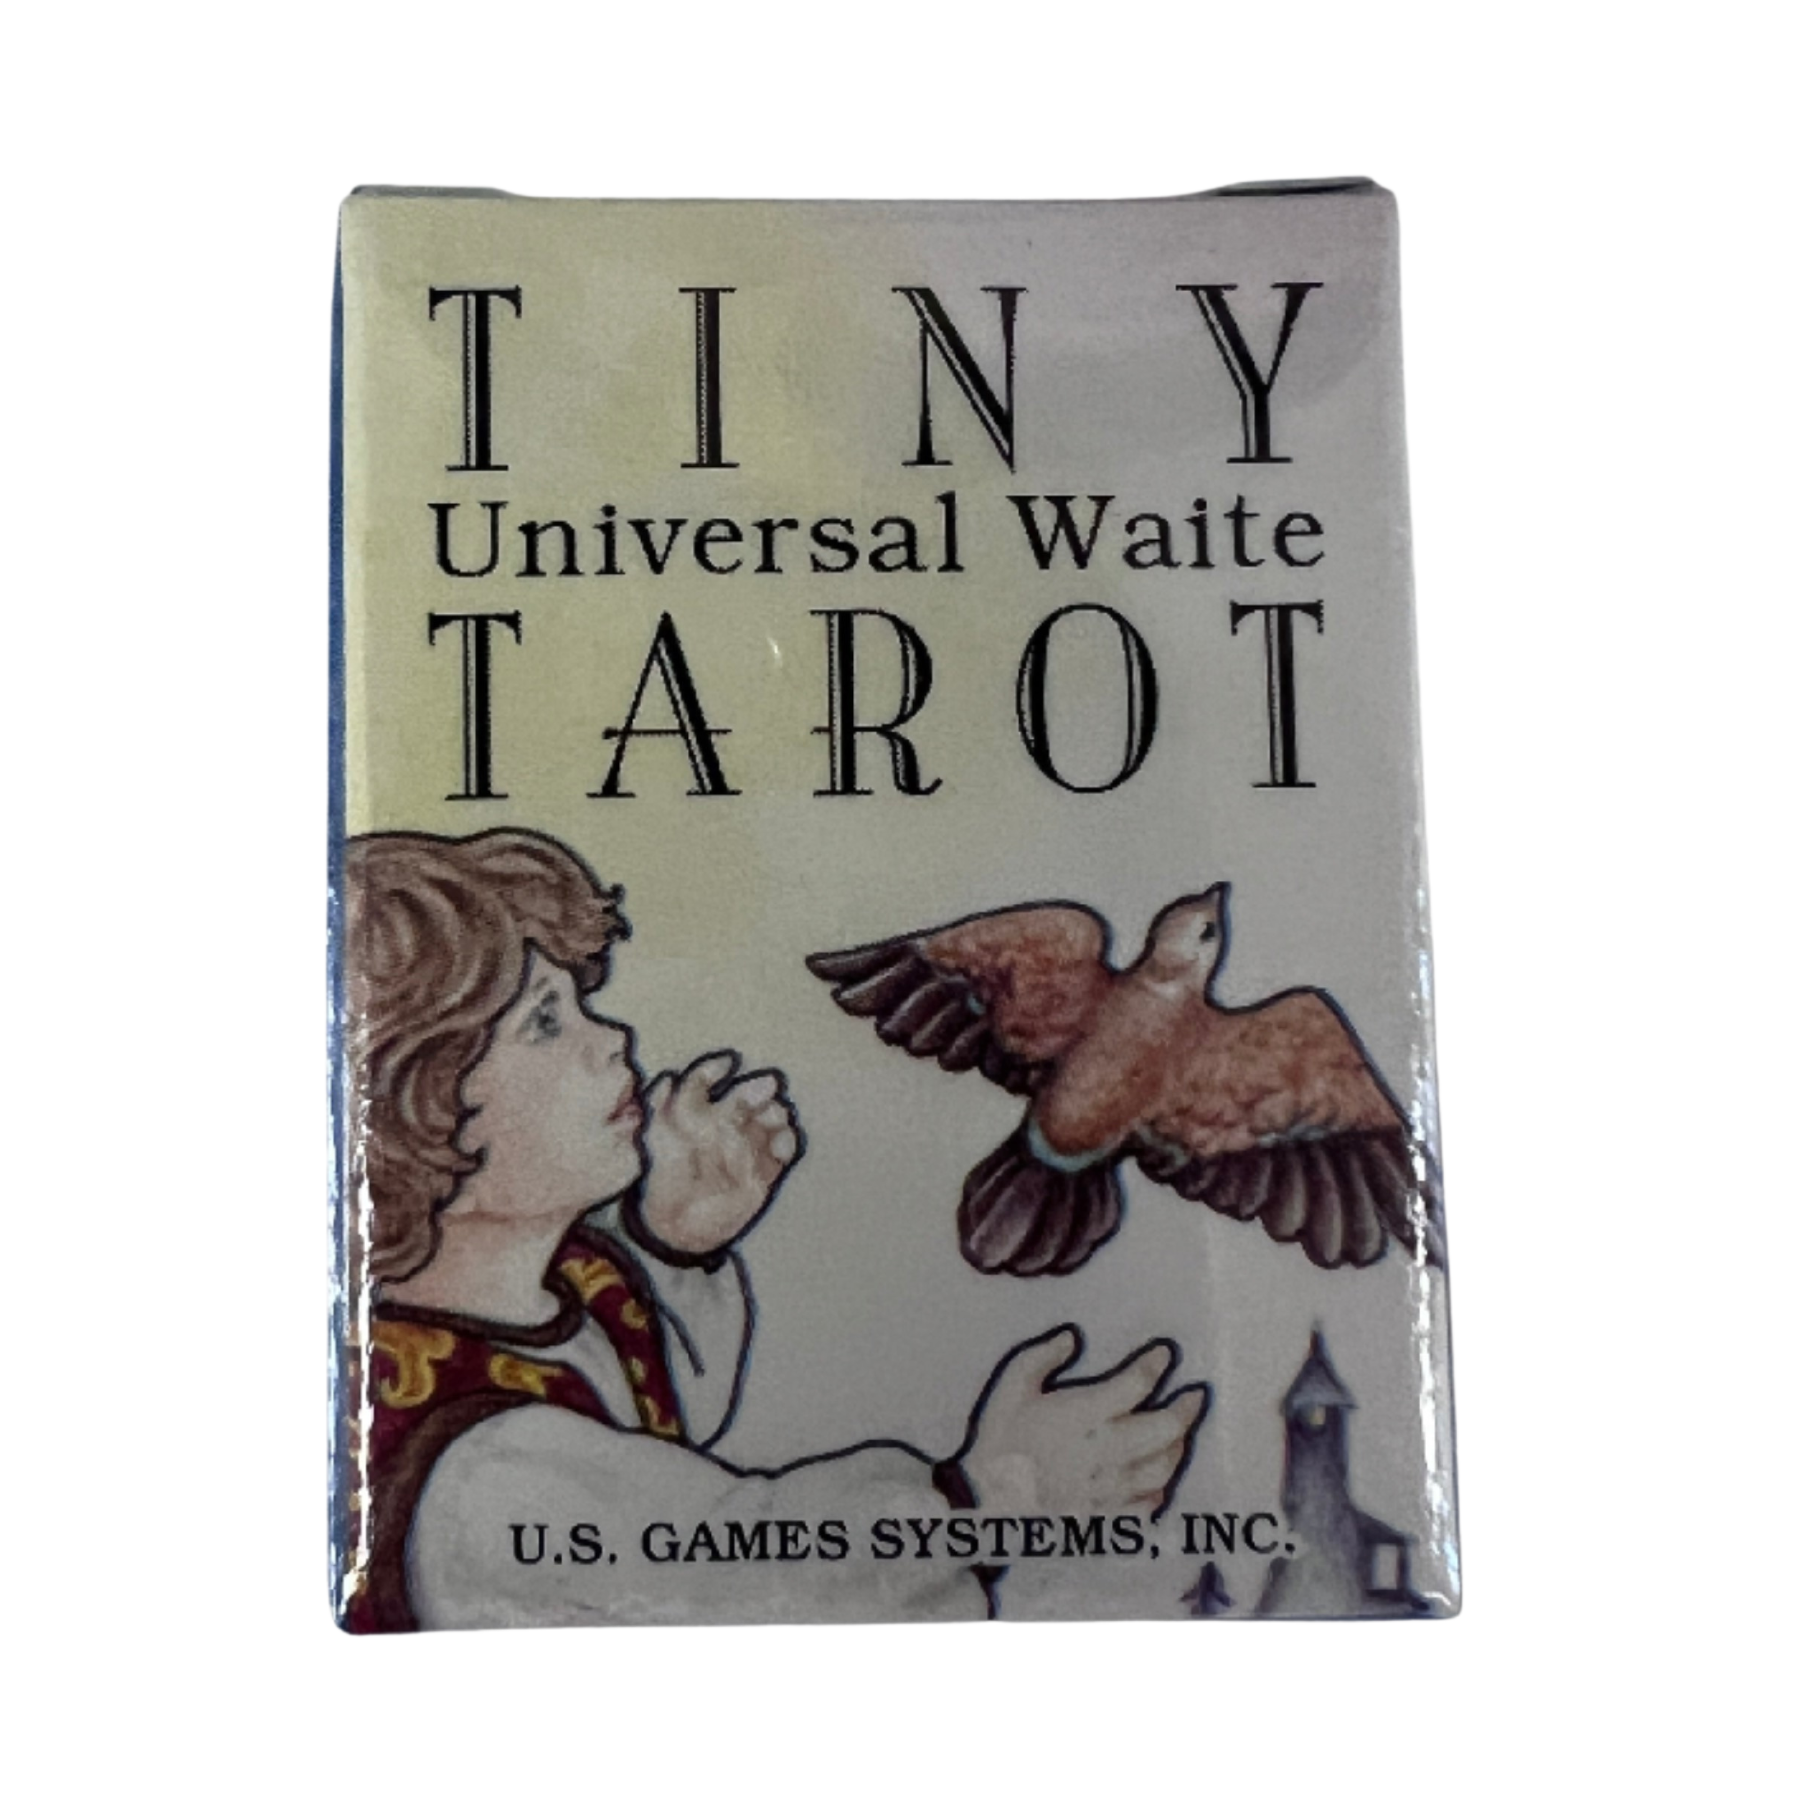 Tiny small box size of matchbook with image of child releasing a bird tiny universal tarot